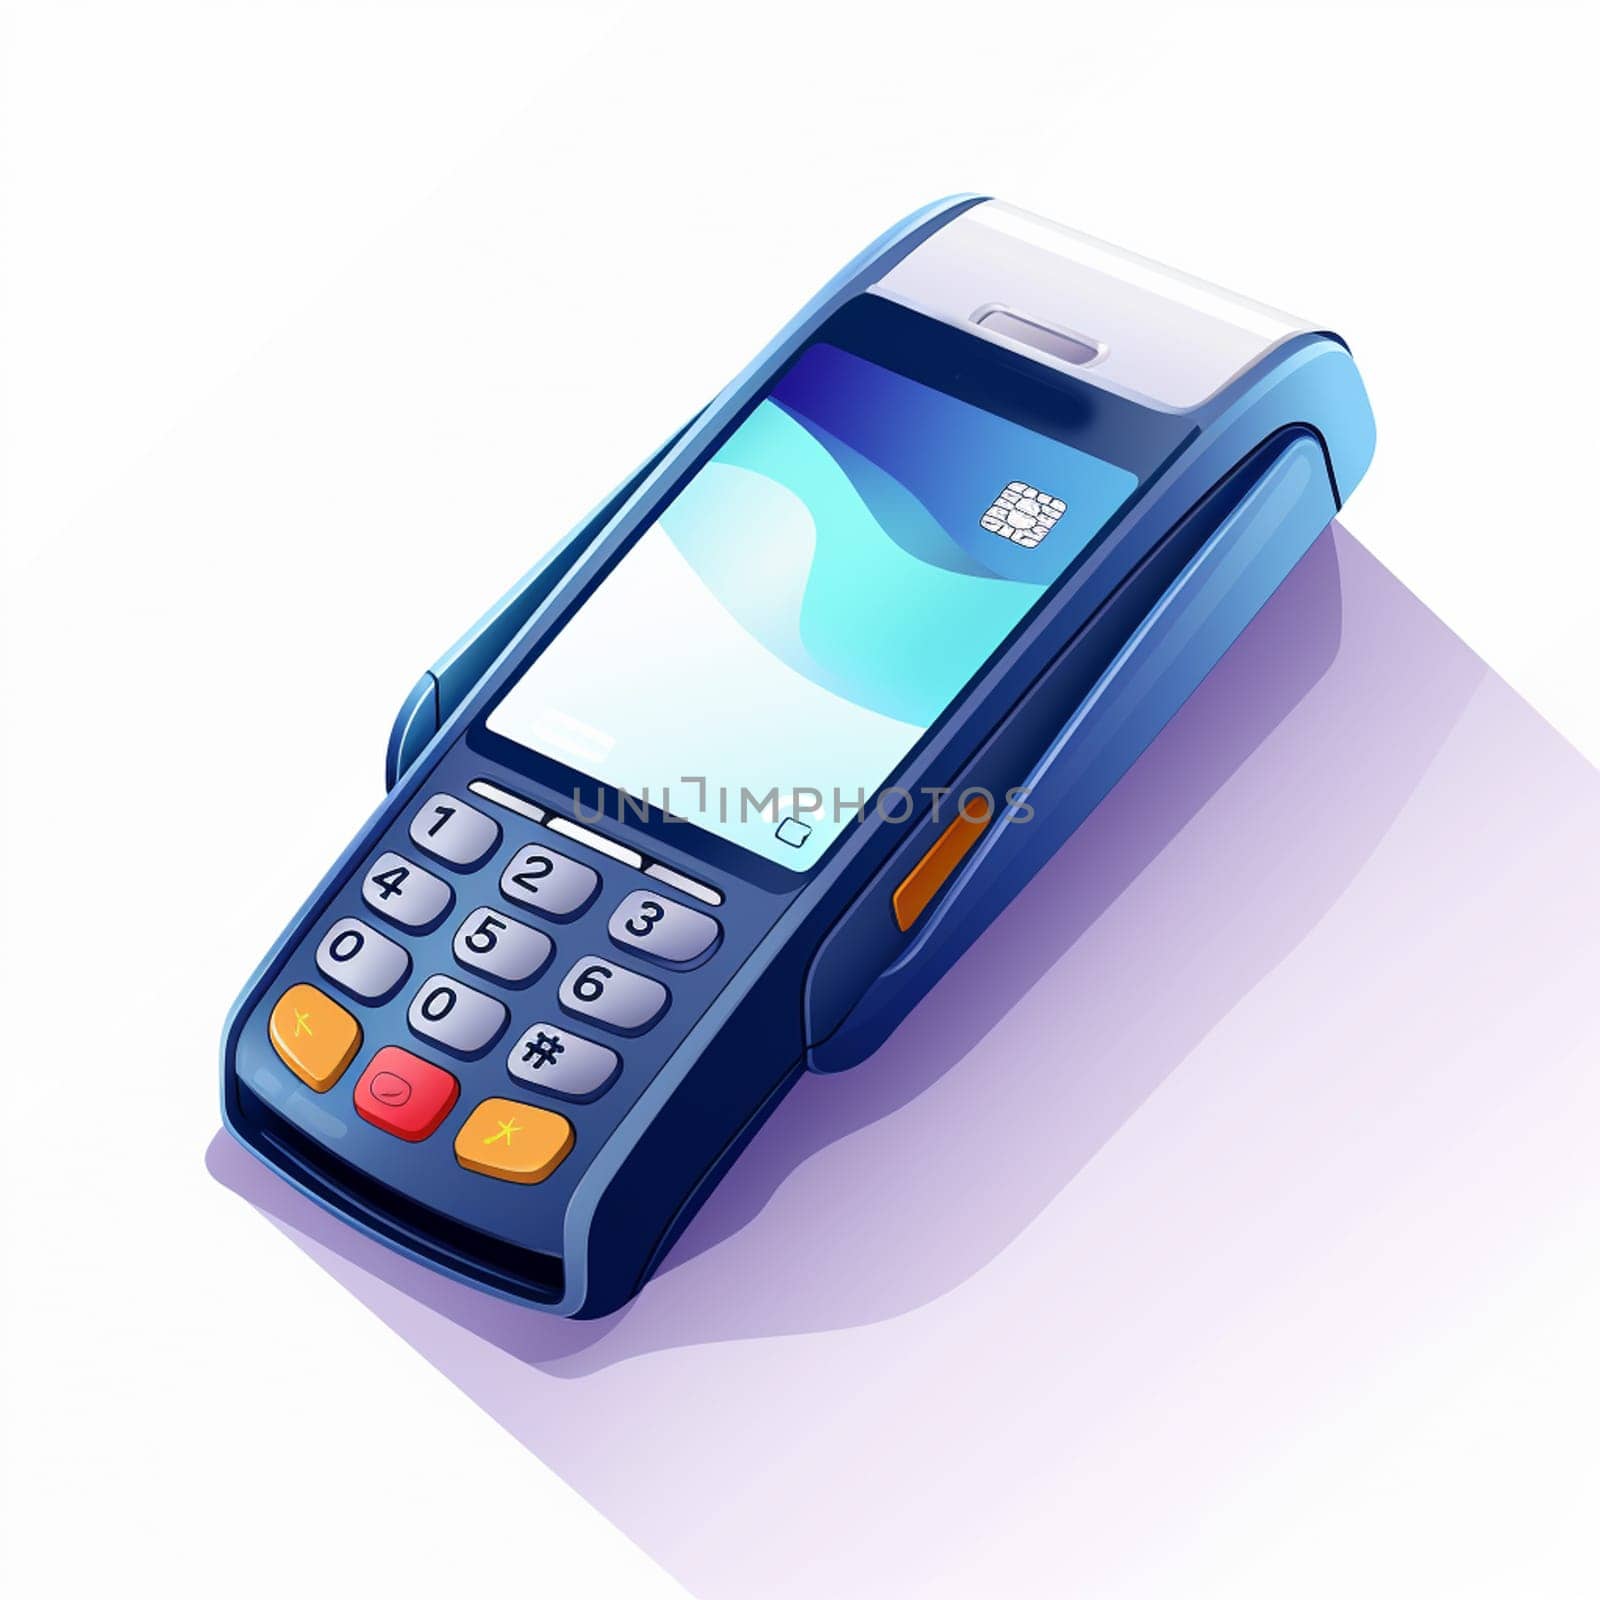 POS Payment GPRS Terminal, isolated on white. High quality photo